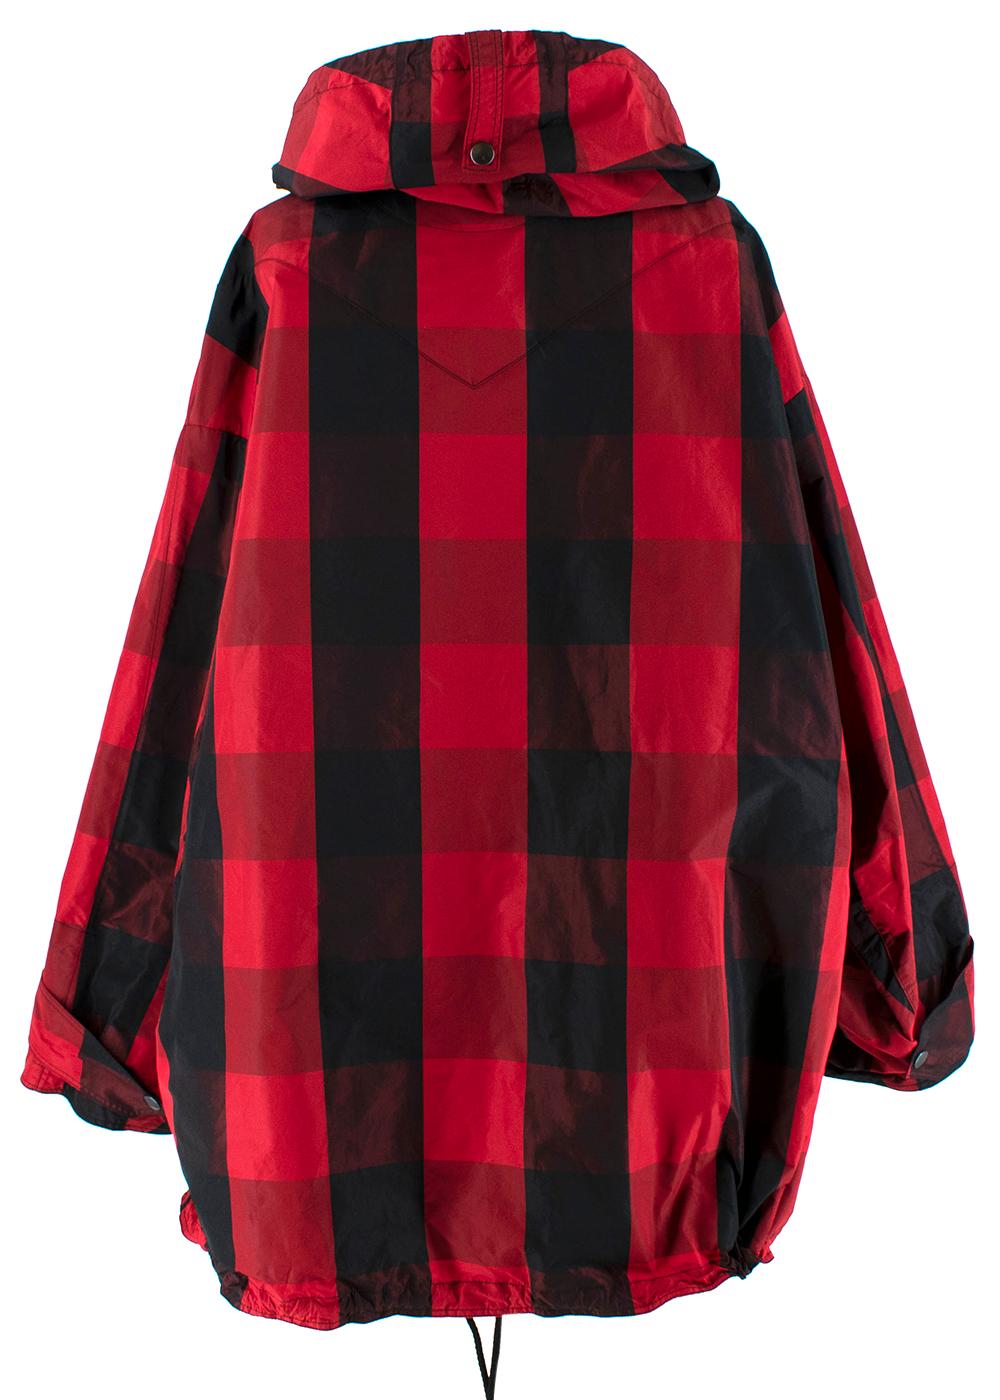 Christian Dior Black & Red Checkered Taffeta Hooded Anorak 

- 'Christian Dior' signature
- Black bee embroidery
- Drawstring hood
- Zip closure
- Long sleeves
- Button-tab cuffs
- Kangaroo patch pocket
- Oversized fit

Materials 
100% Polyester